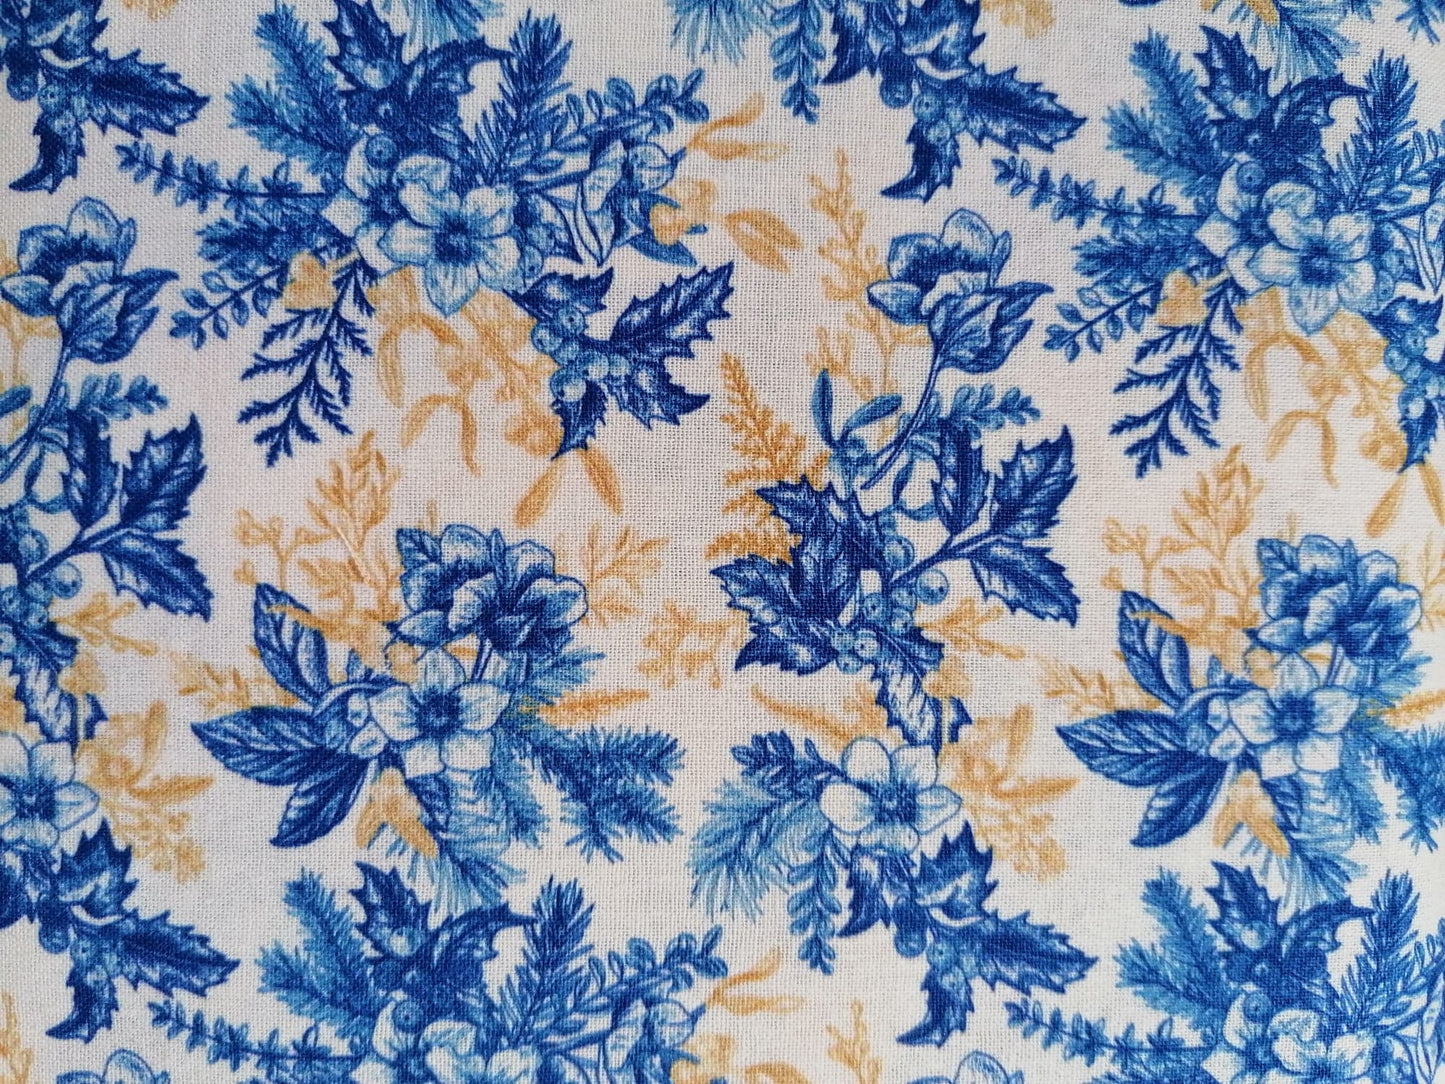 100% Cotton - Quilting and Crafting - Floral - Blue/Mustard/Cream - 60" Wide - Sold By the Metre